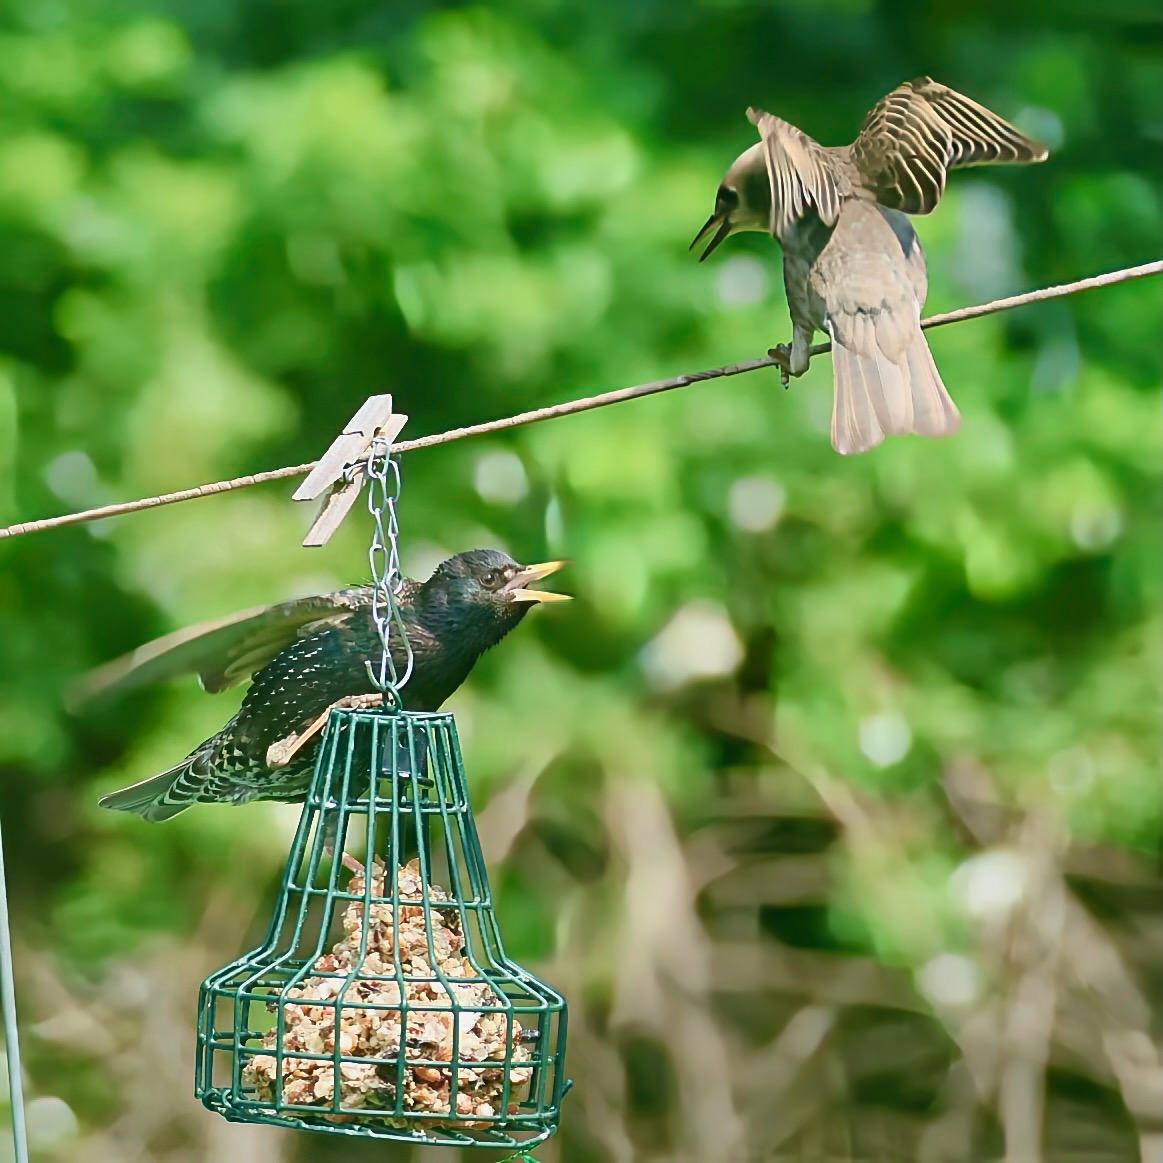 The birdfeeder is a source of endless drama. #BirdWatching #Starling #TrumbullCT